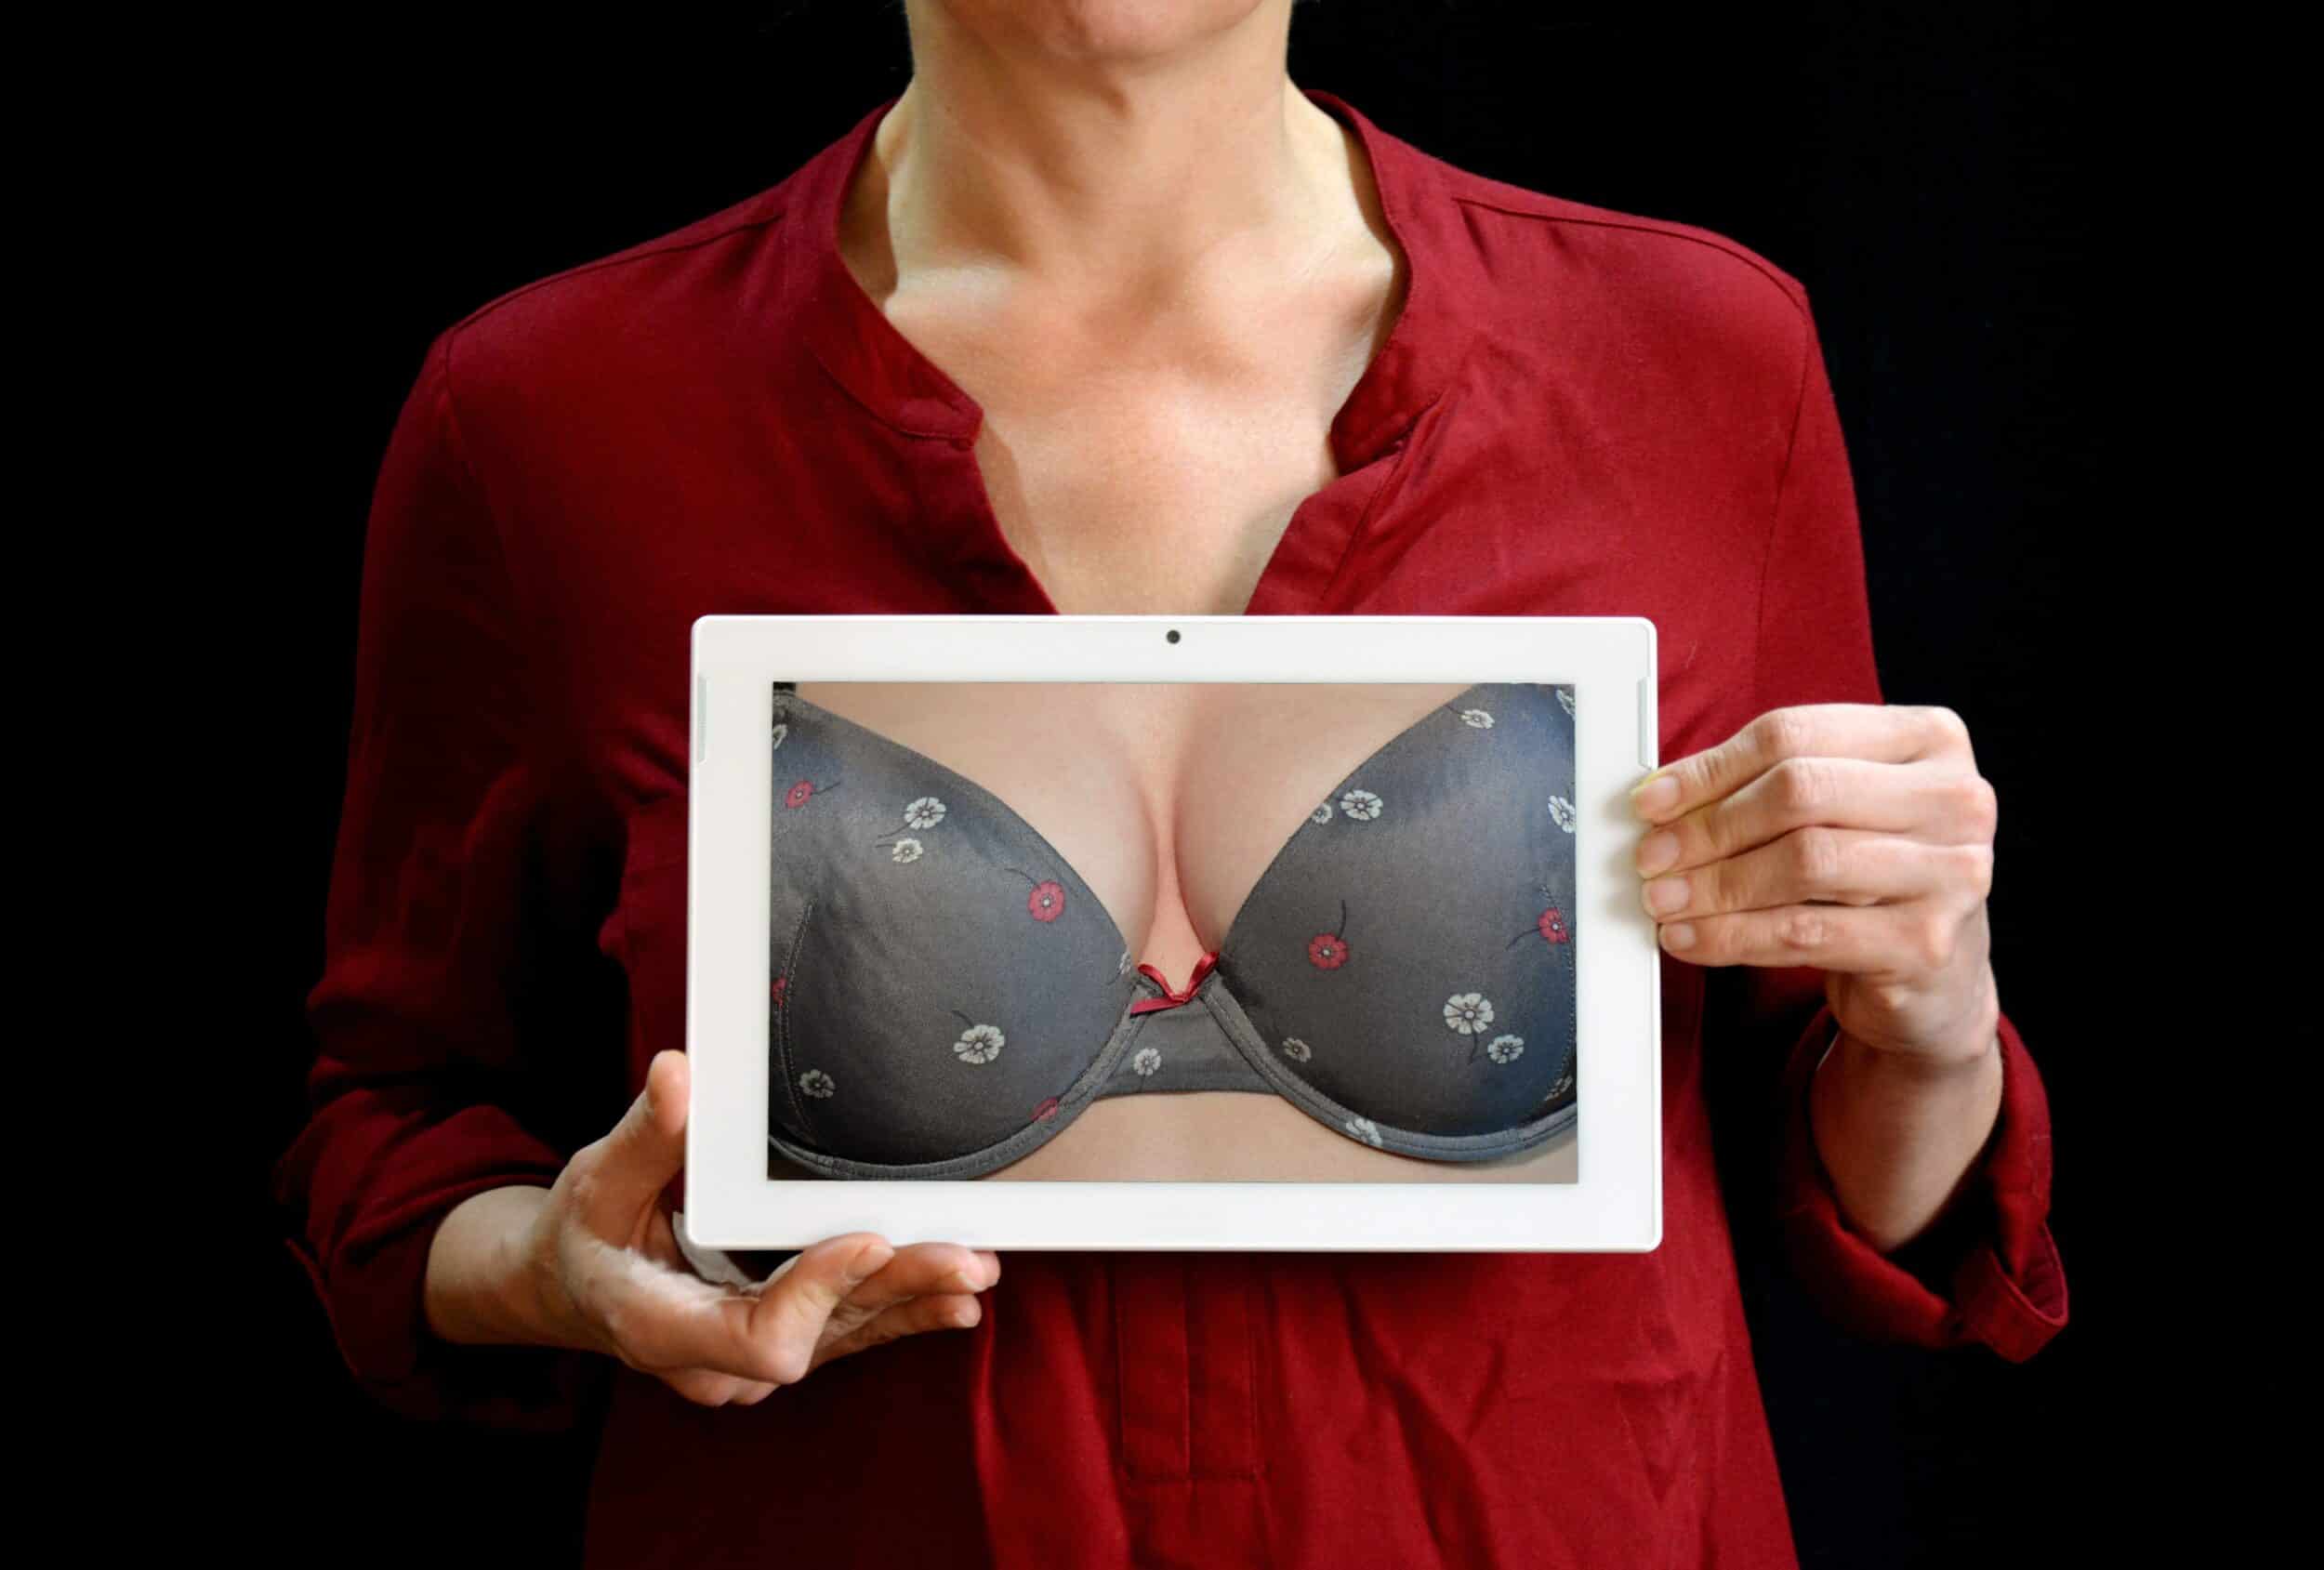 Mastectomy Bras, For All Breast Surgeries and Reconstructions